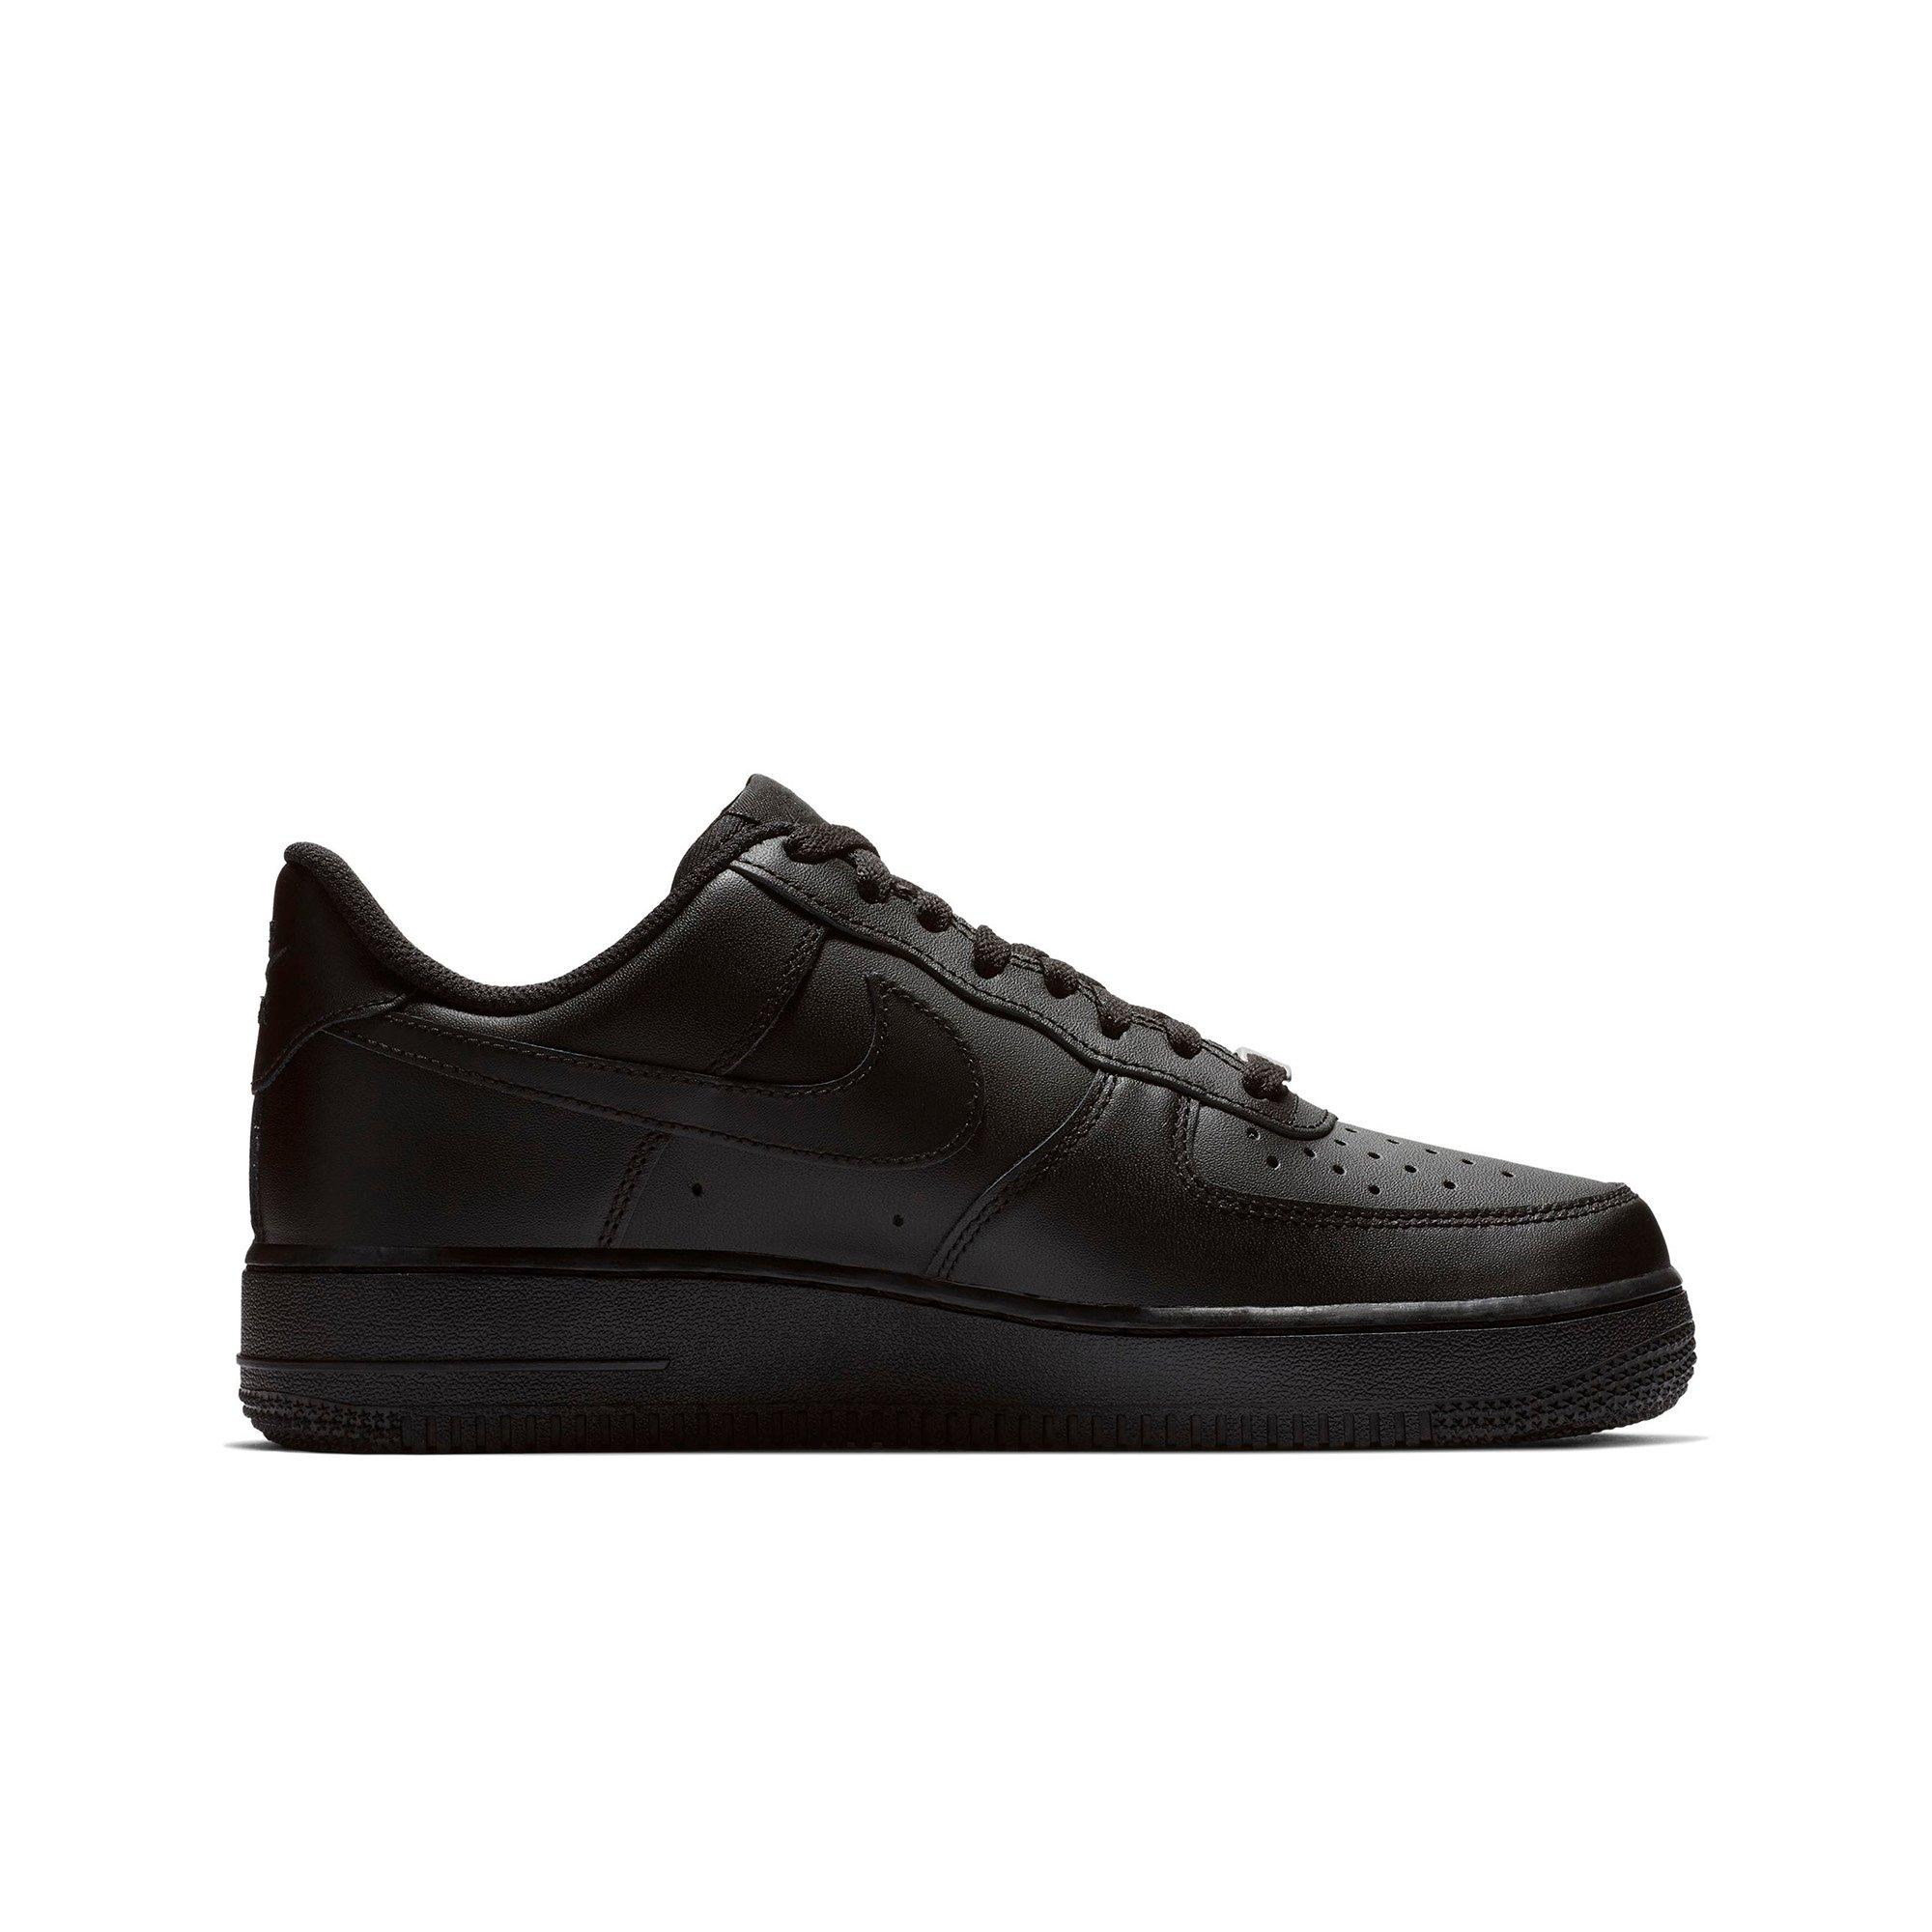 air force 1 size 4 black